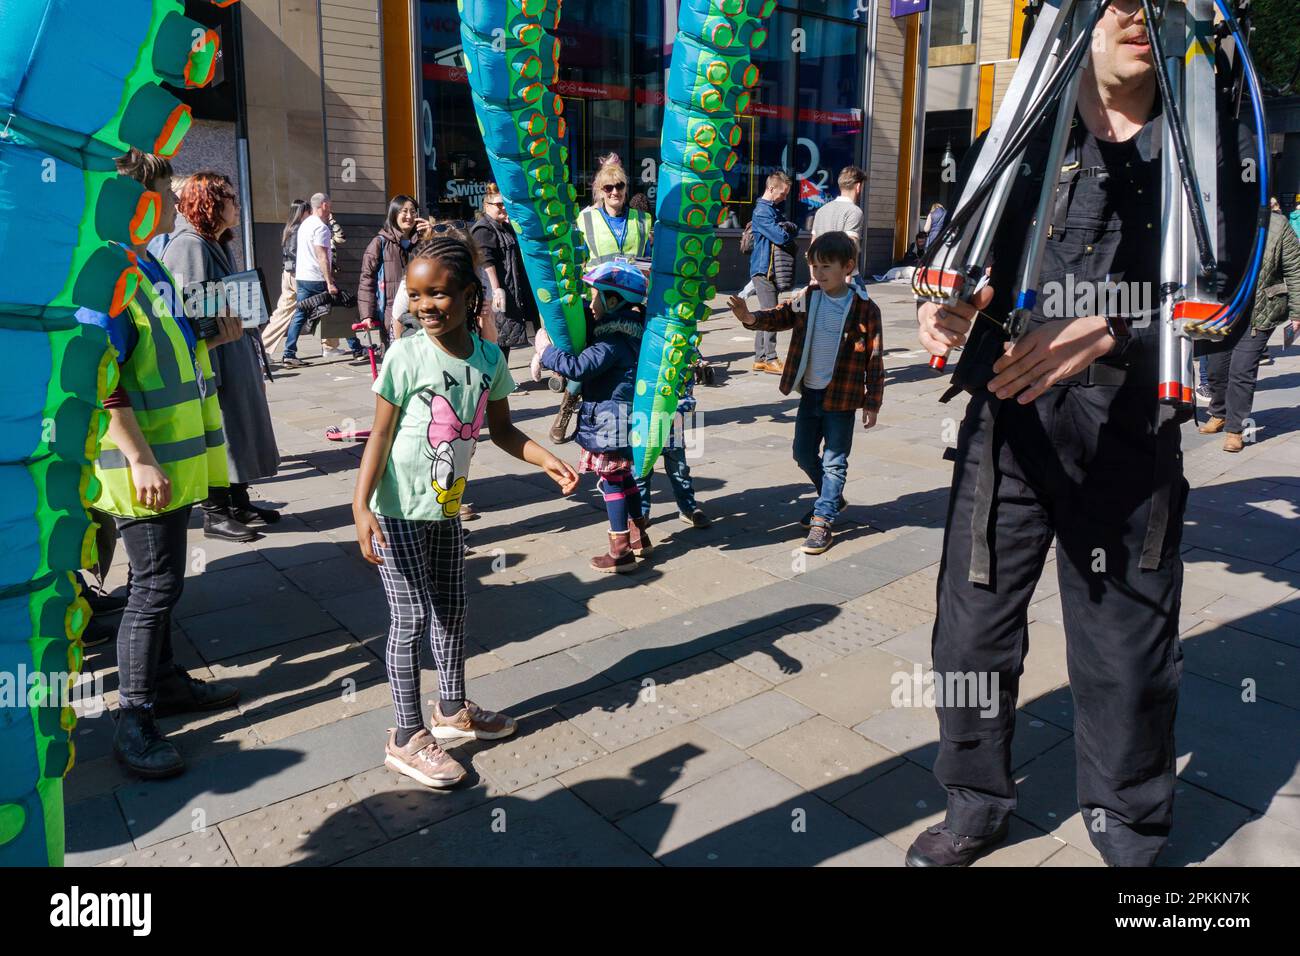 Newcastle upon Tyne, UK. 8th April 2023. Wor Seahorse Spectacle, an outdoor public parade as part of the Moving Parts Puppetry Festival in the city. Colourful entertainment on Easter Saturday on Northumberland Street by an inclusive, community project, incorporating Beasts on the Street wth The Living Fossils Company and Ocho the Octopus by Tim Davies Design. Stock Photo